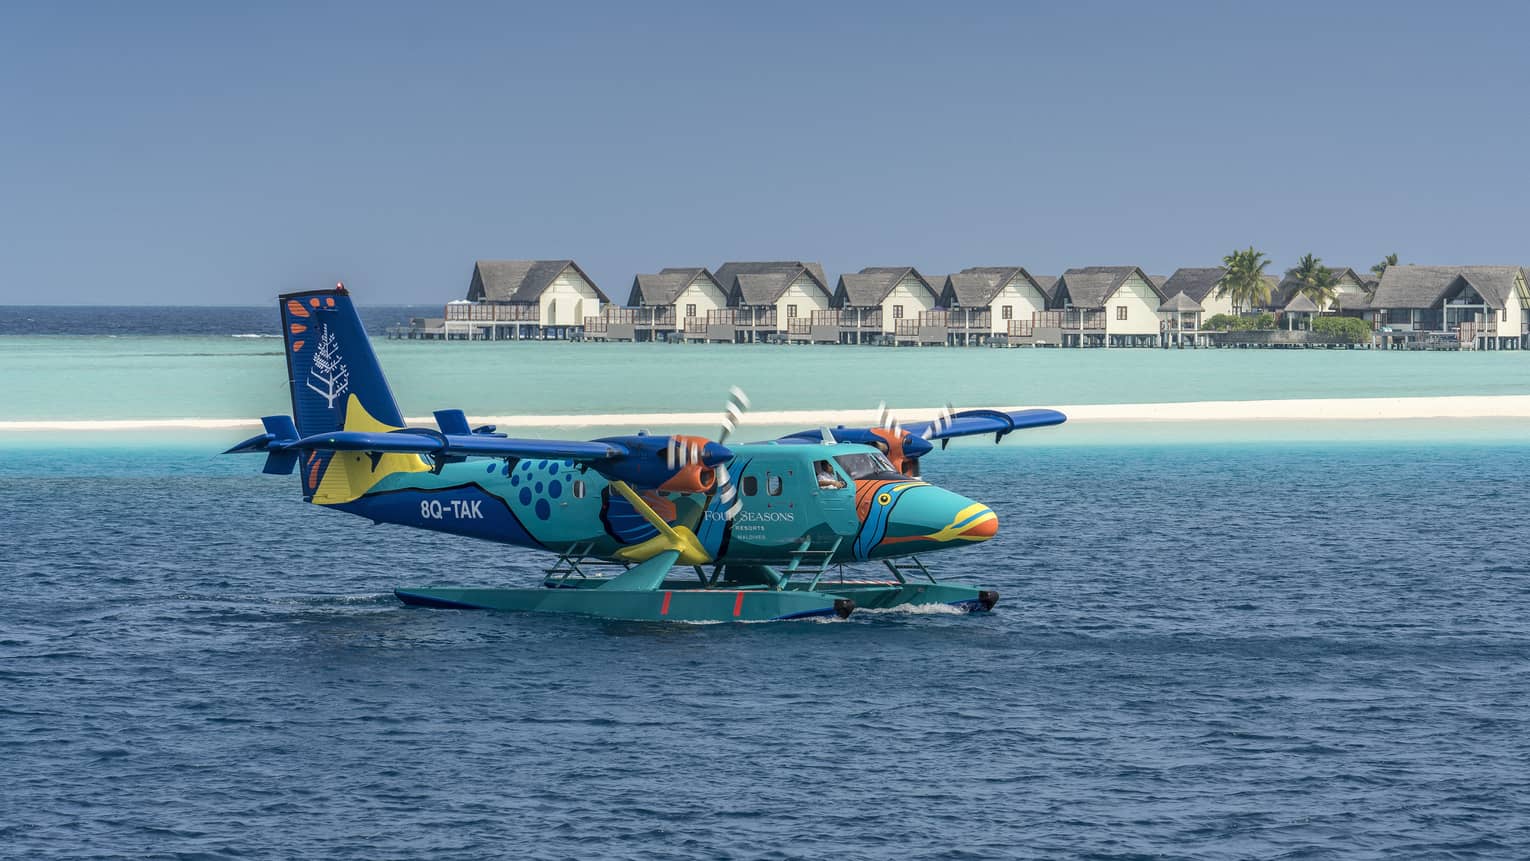 The Four Seasons sea plane landing on calm water in front of beach houses and palm trees